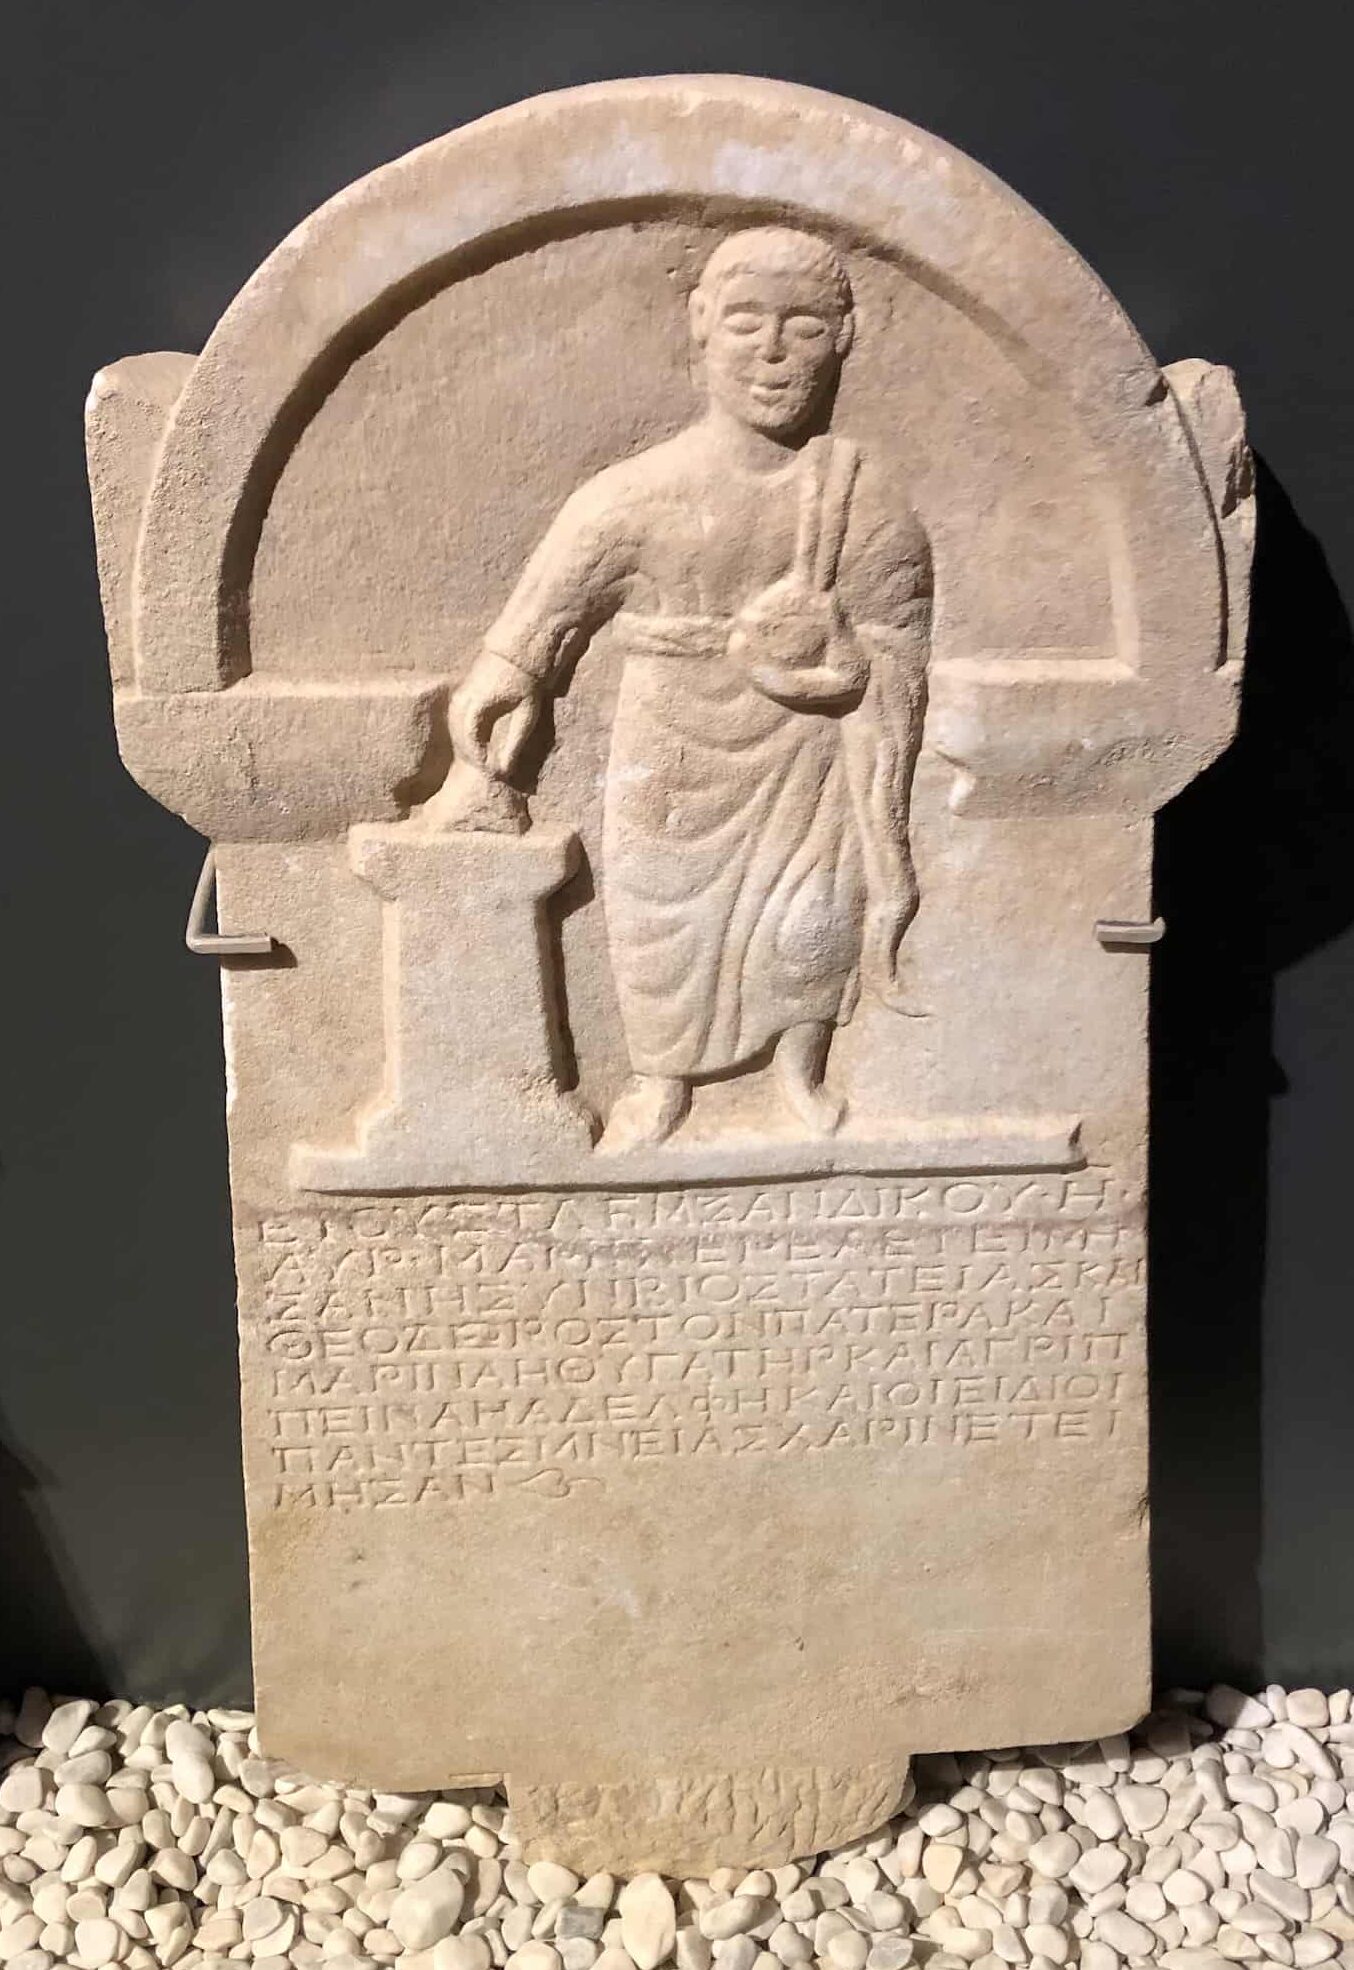 Marble stele inscribed in Greek for Aur. Marius in 251 AD (Roman) at the Museum of Anatolian Civilizations in Ankara, Turkey